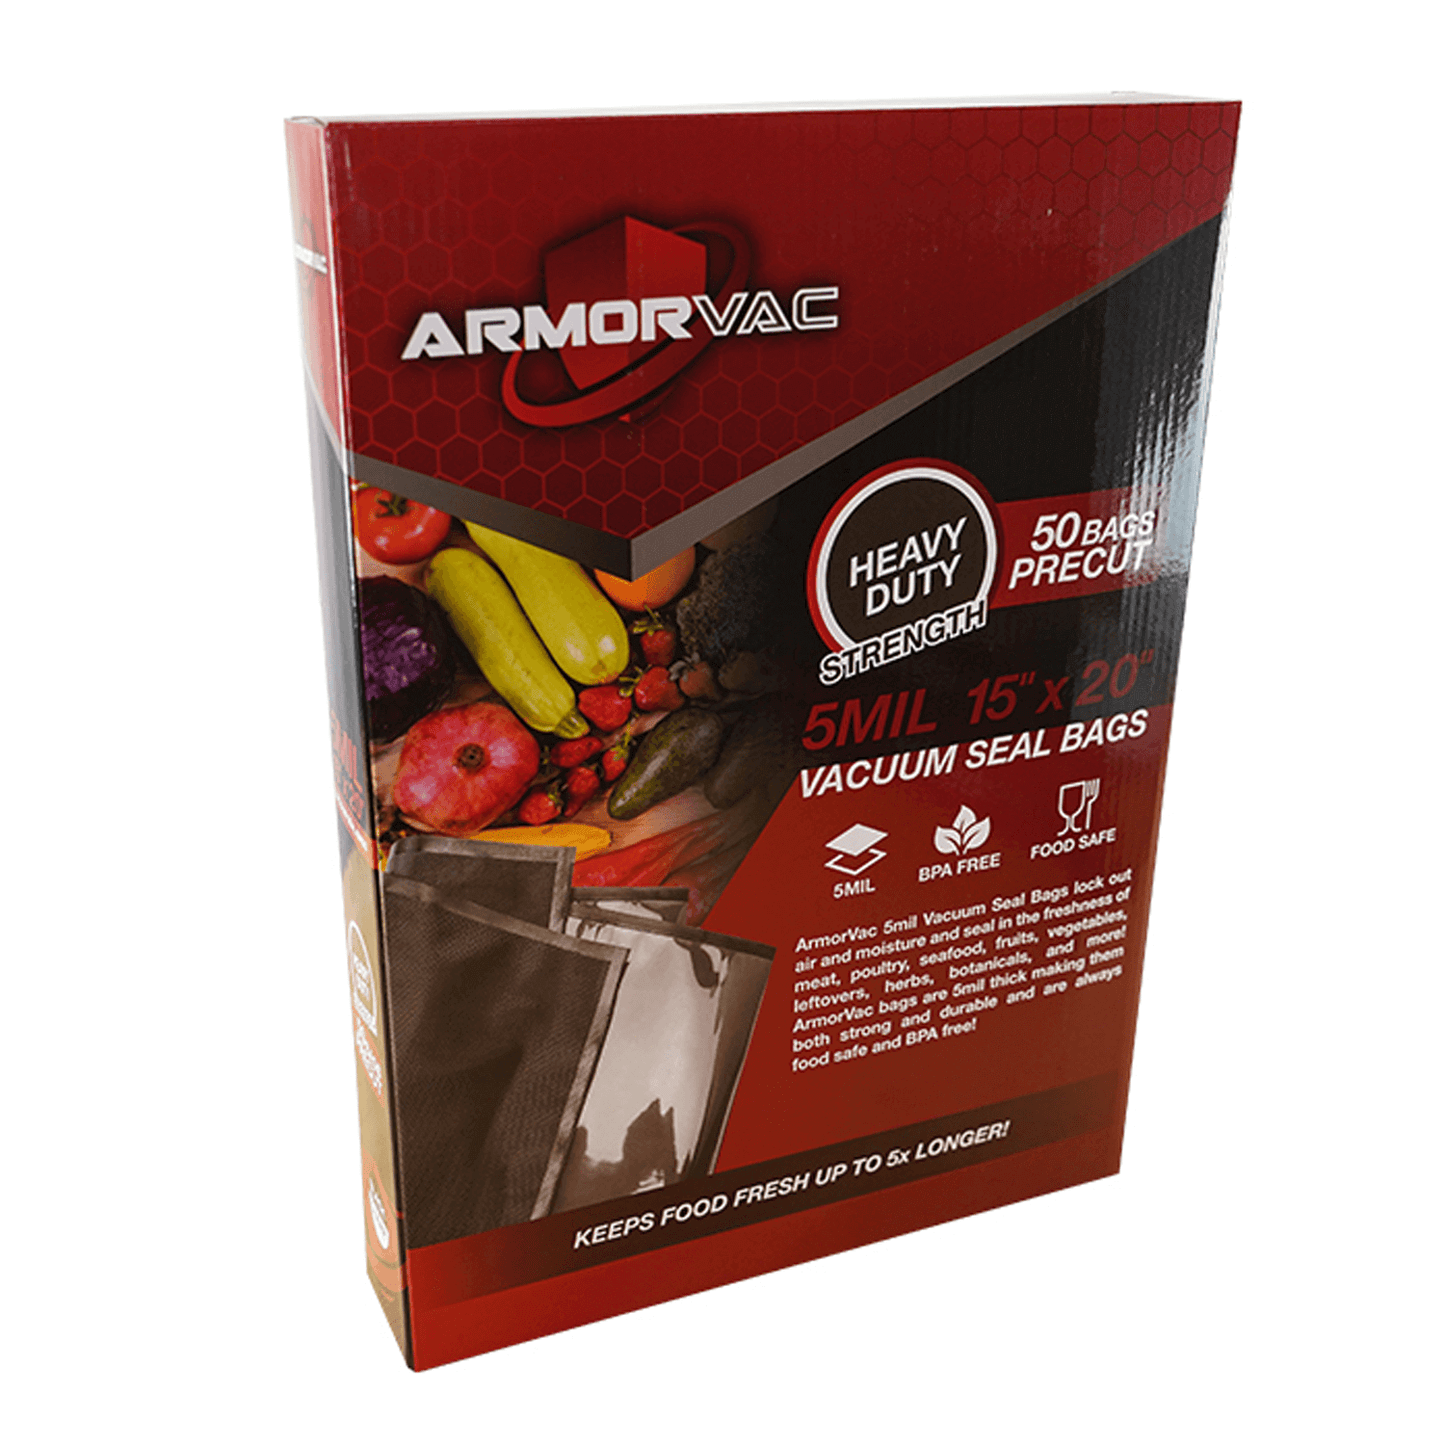 ArmorVac 15"x20" 5mil Precut Vacuum Seal Bags Black & Clear (50 Pack) 131520BCR50 Harvest & Extraction